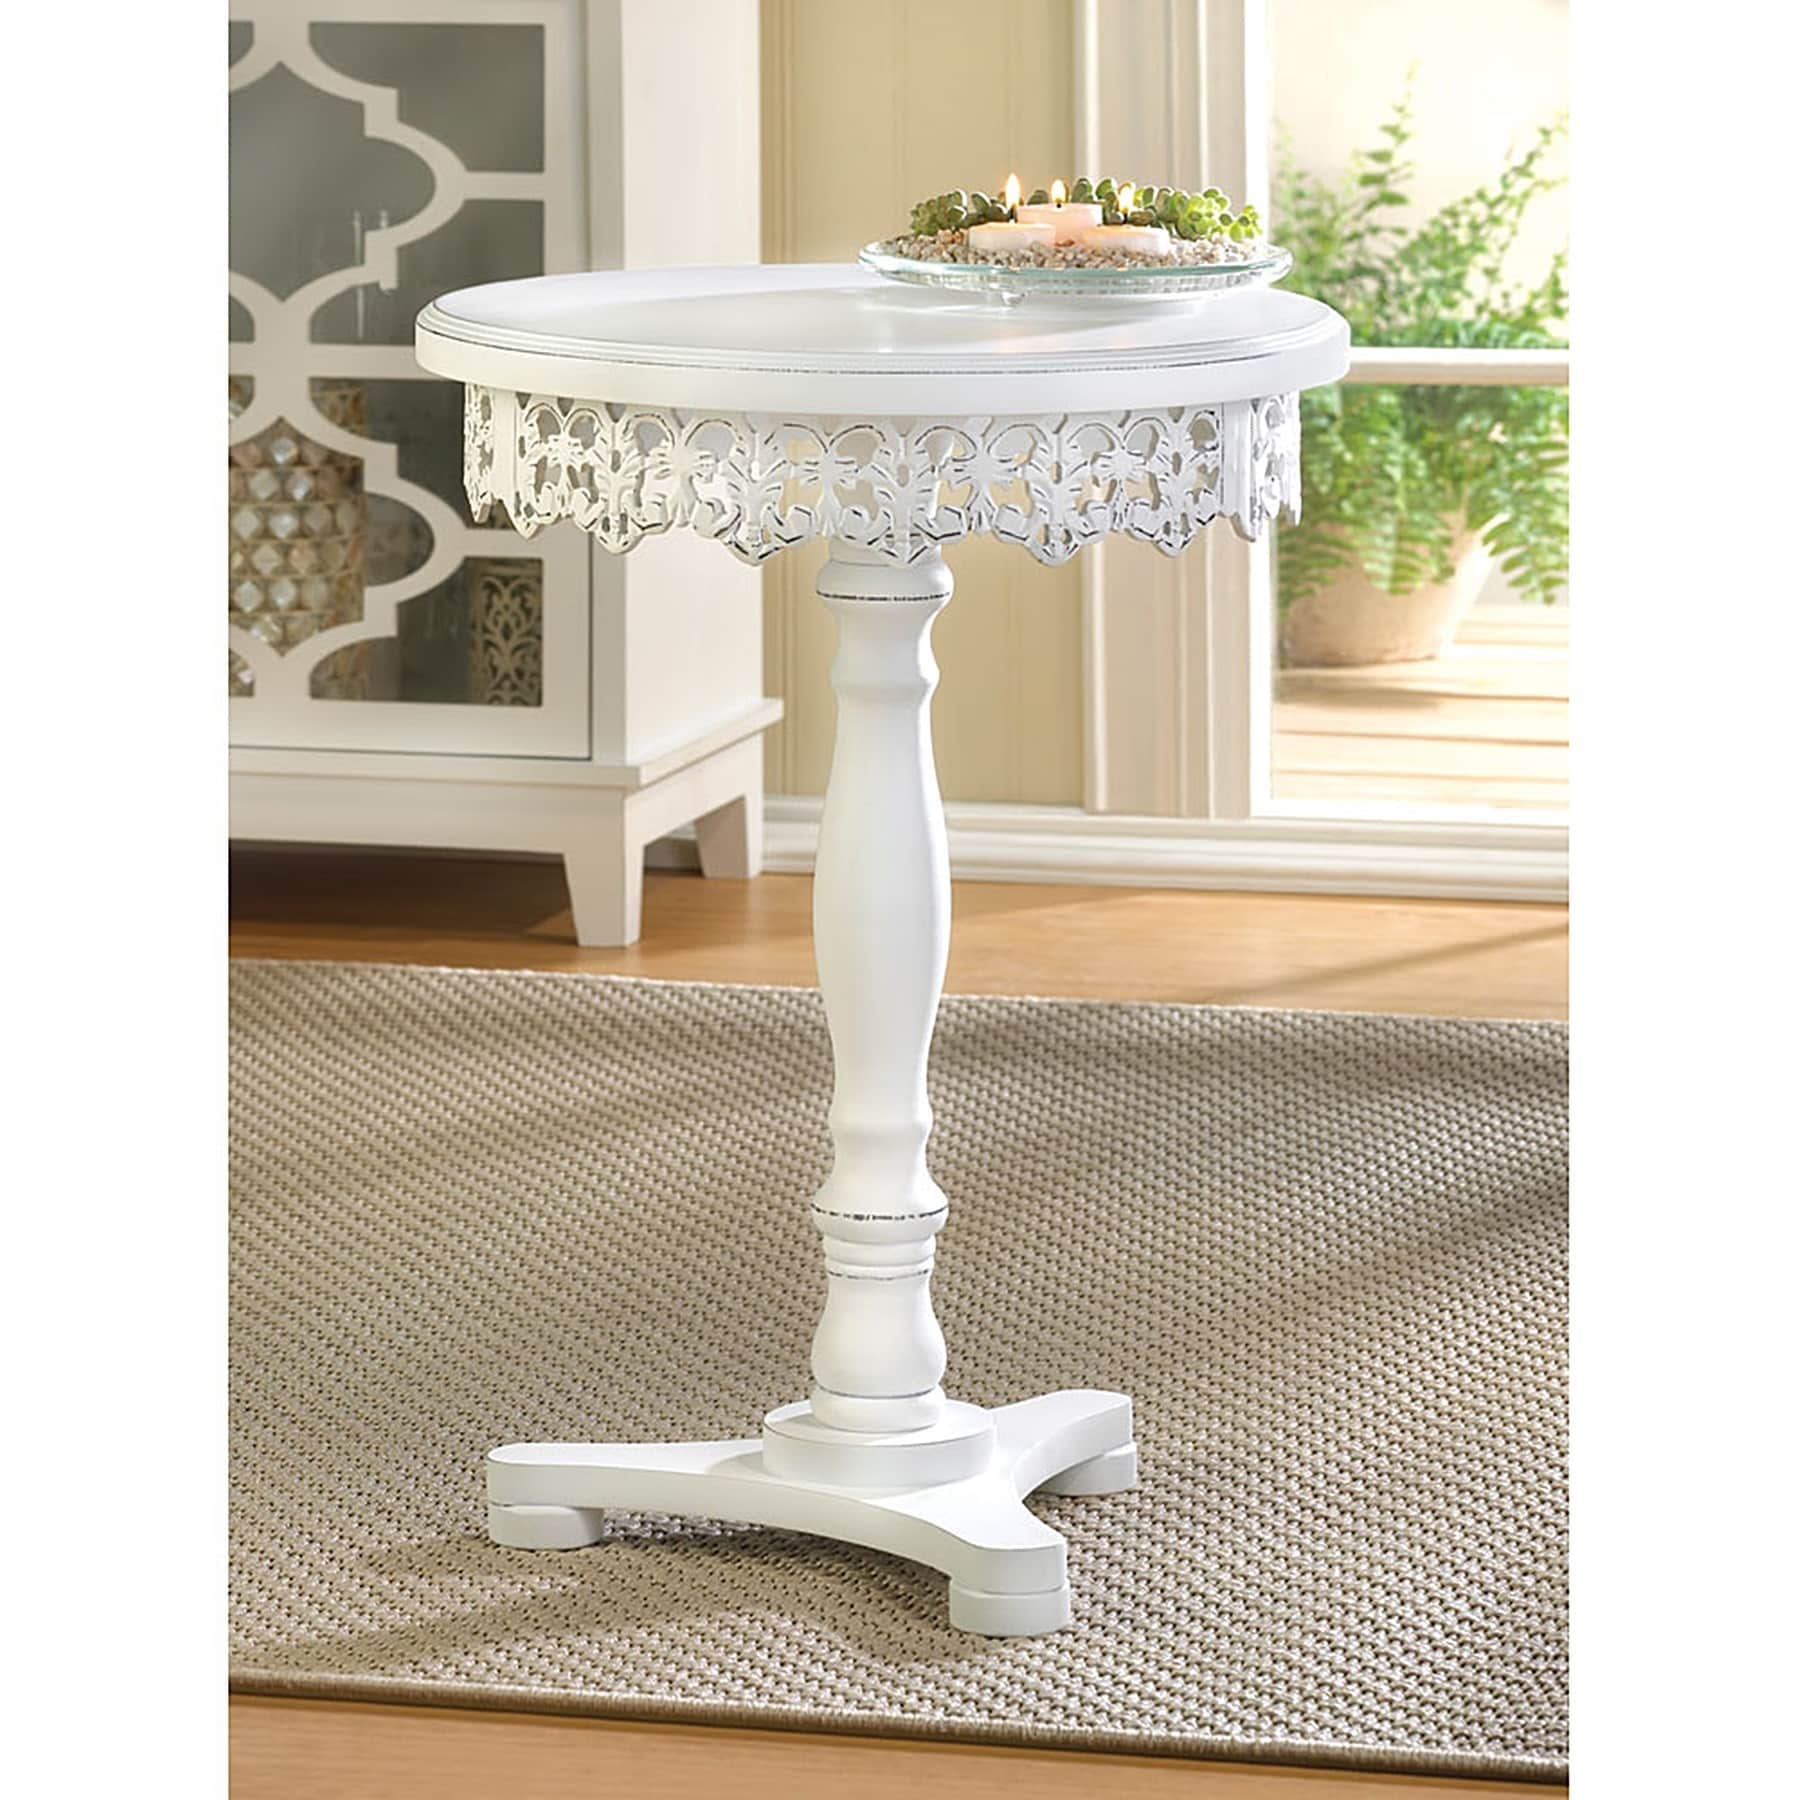 white turned Wood distressed bedside Shabby pedestal End Table nightstand drawer 